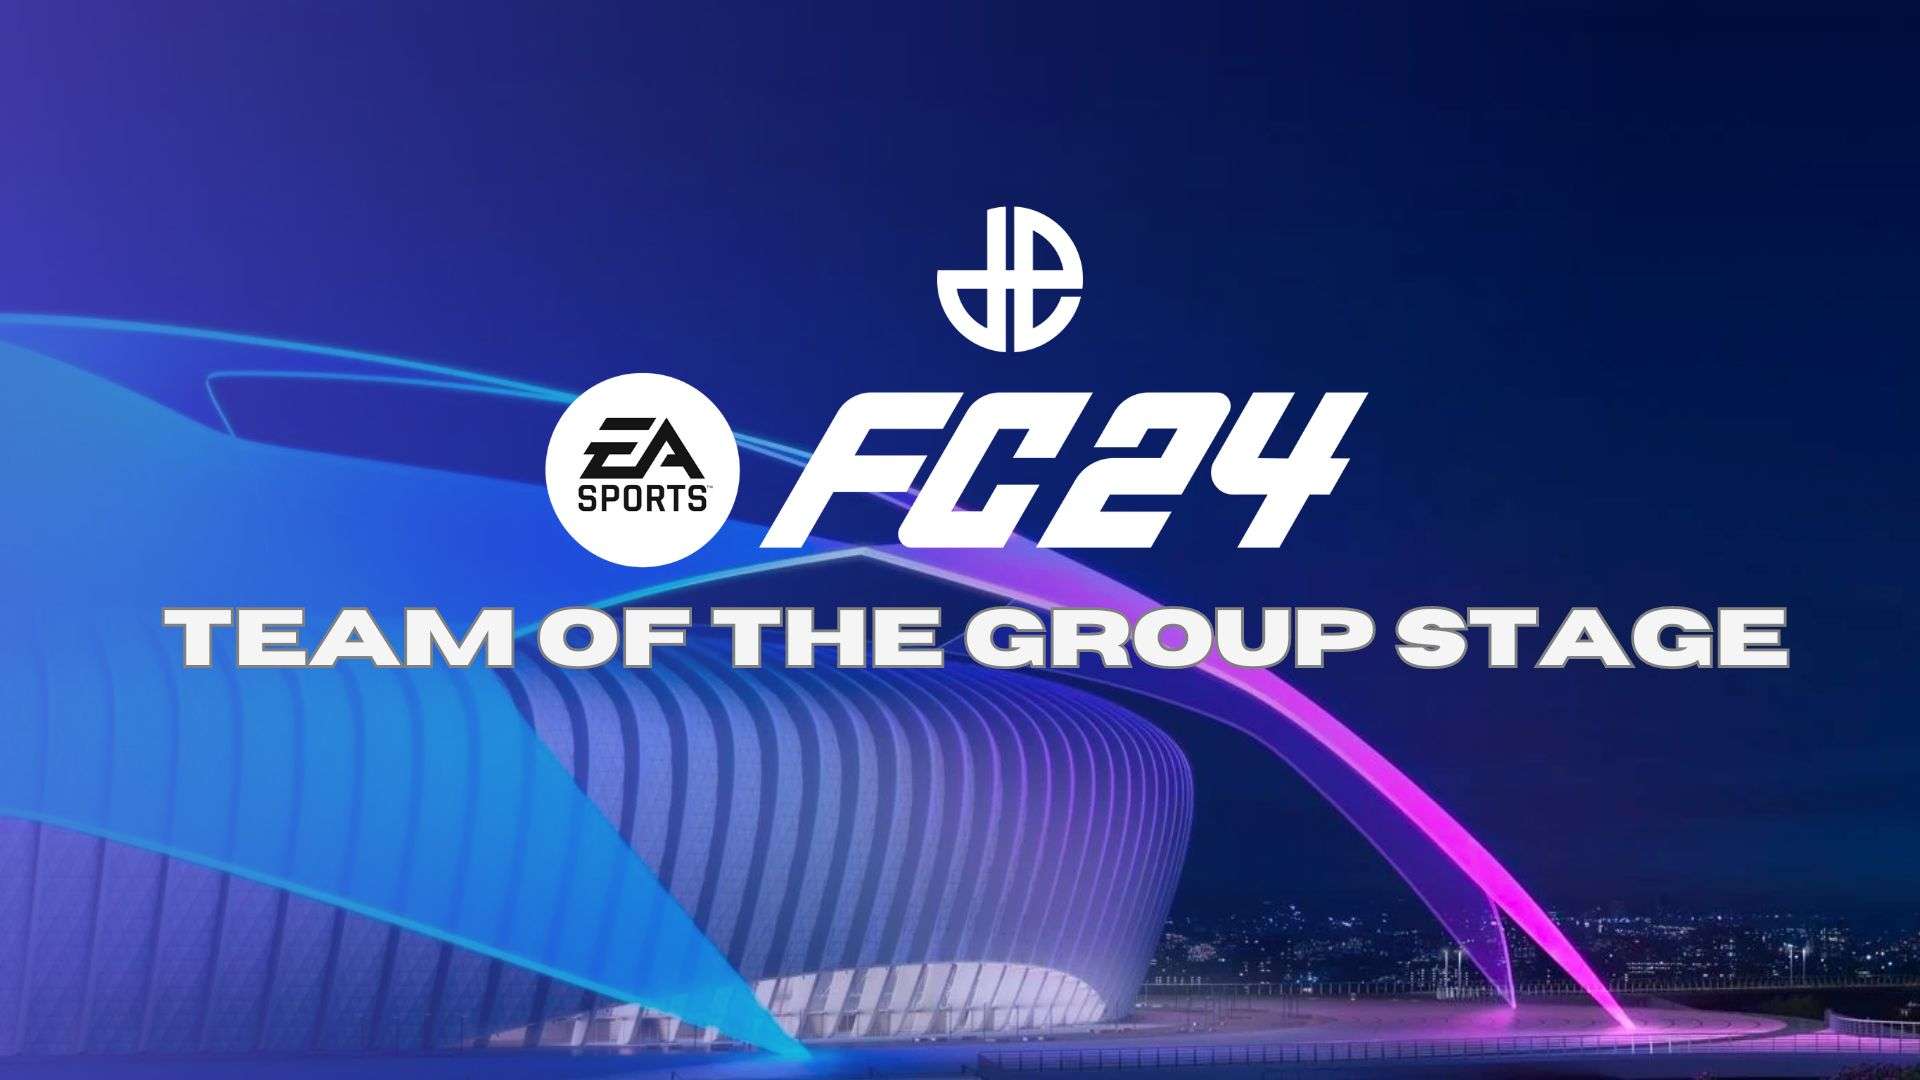 EA SPORTS FC 24 logo on champions league logo for team of the group stage